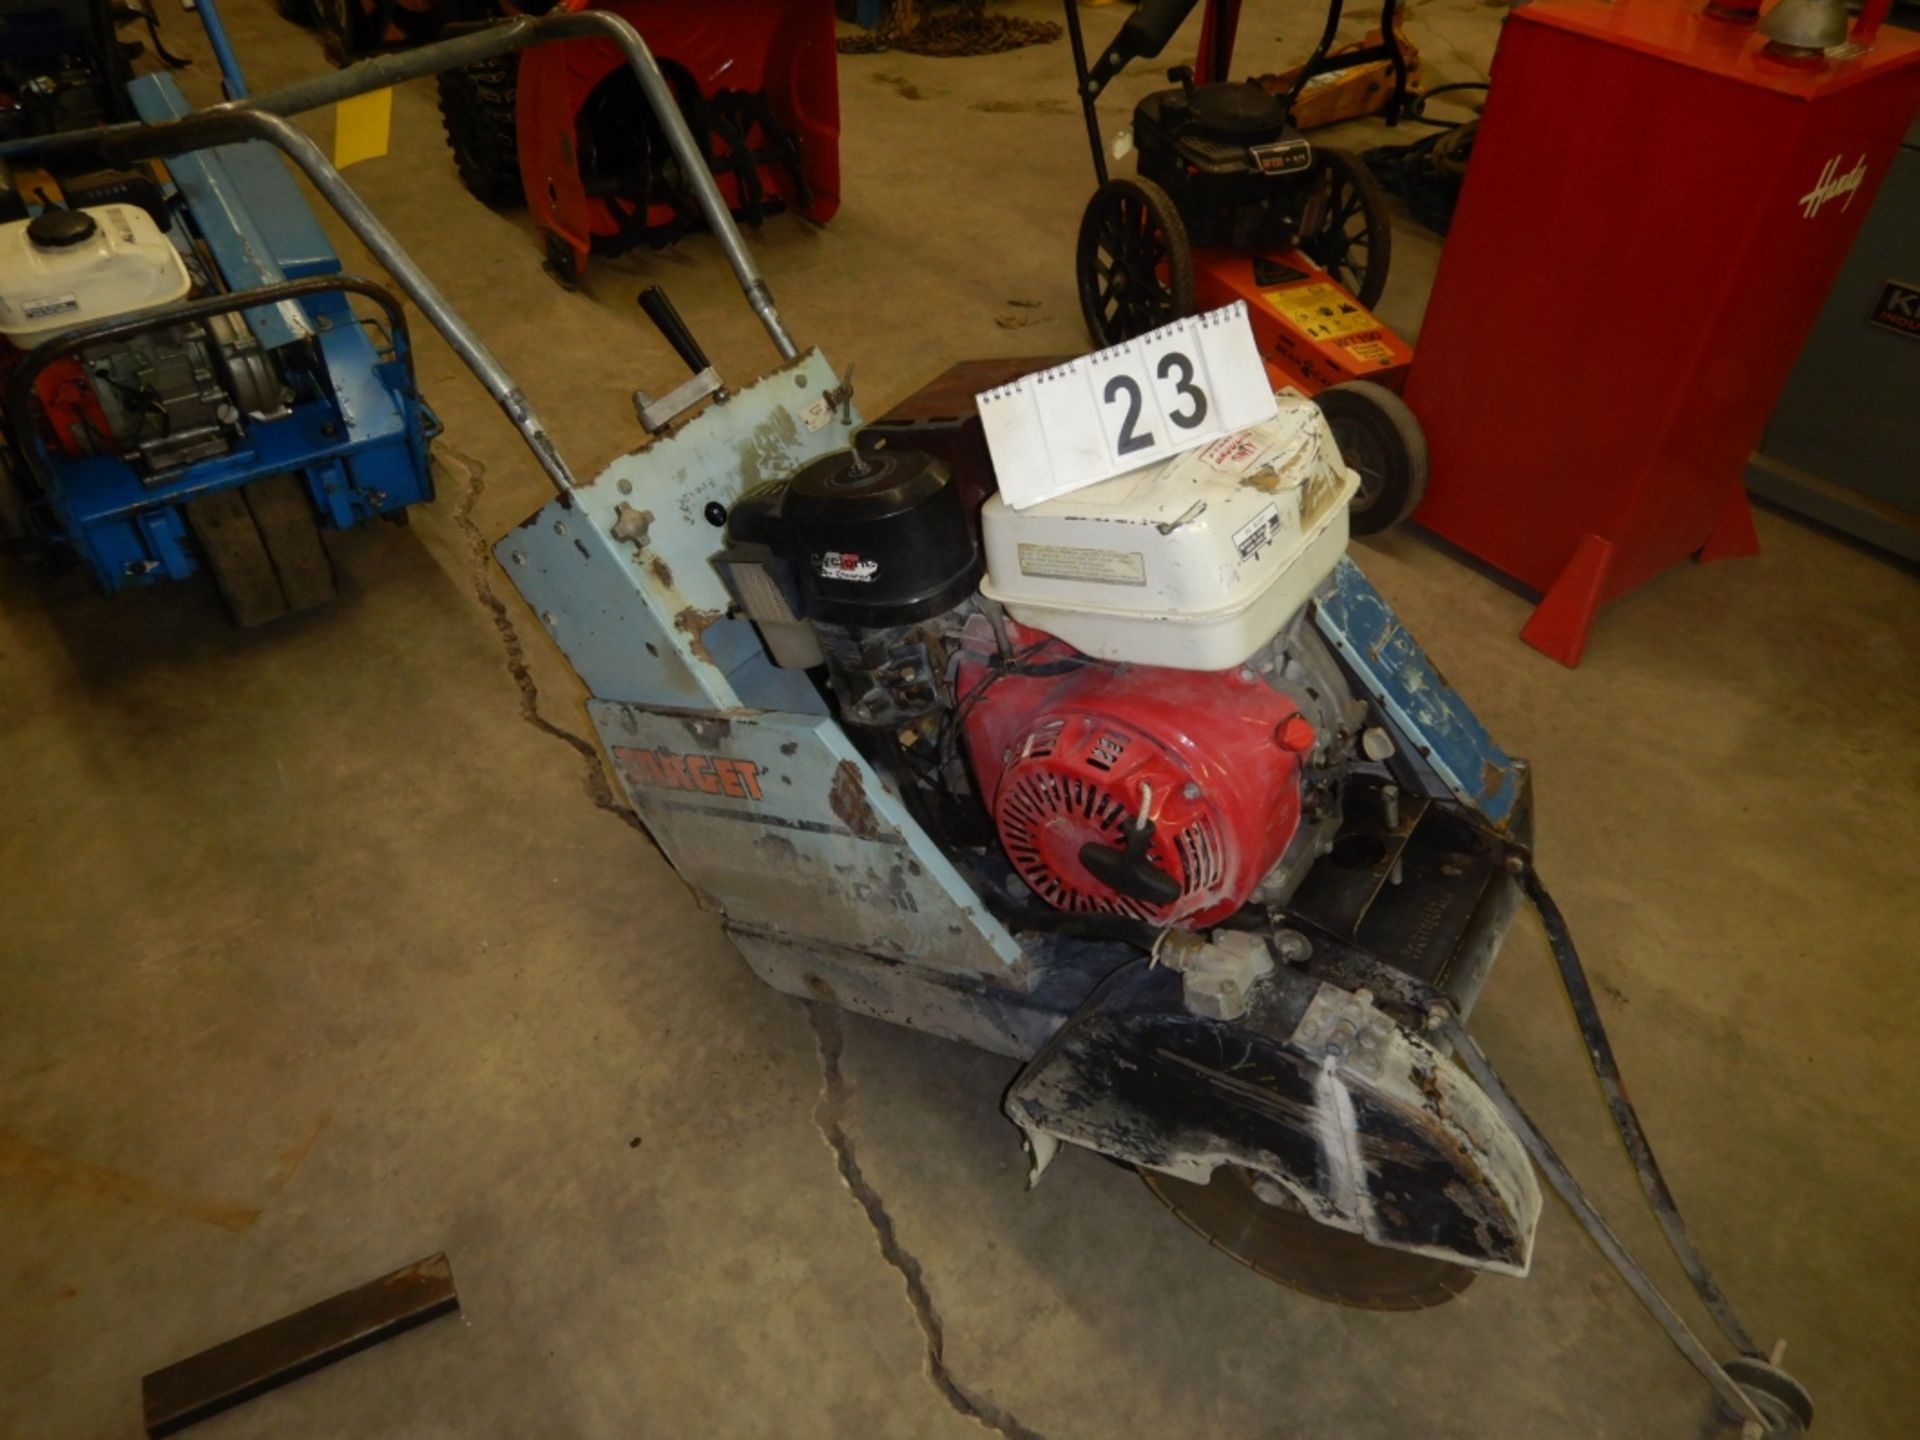 TARGET PAC111 CONCRETE CUTTING SAW MODEL PAC111-13H S/N 147392W/HONDA ENGINE - Image 3 of 3